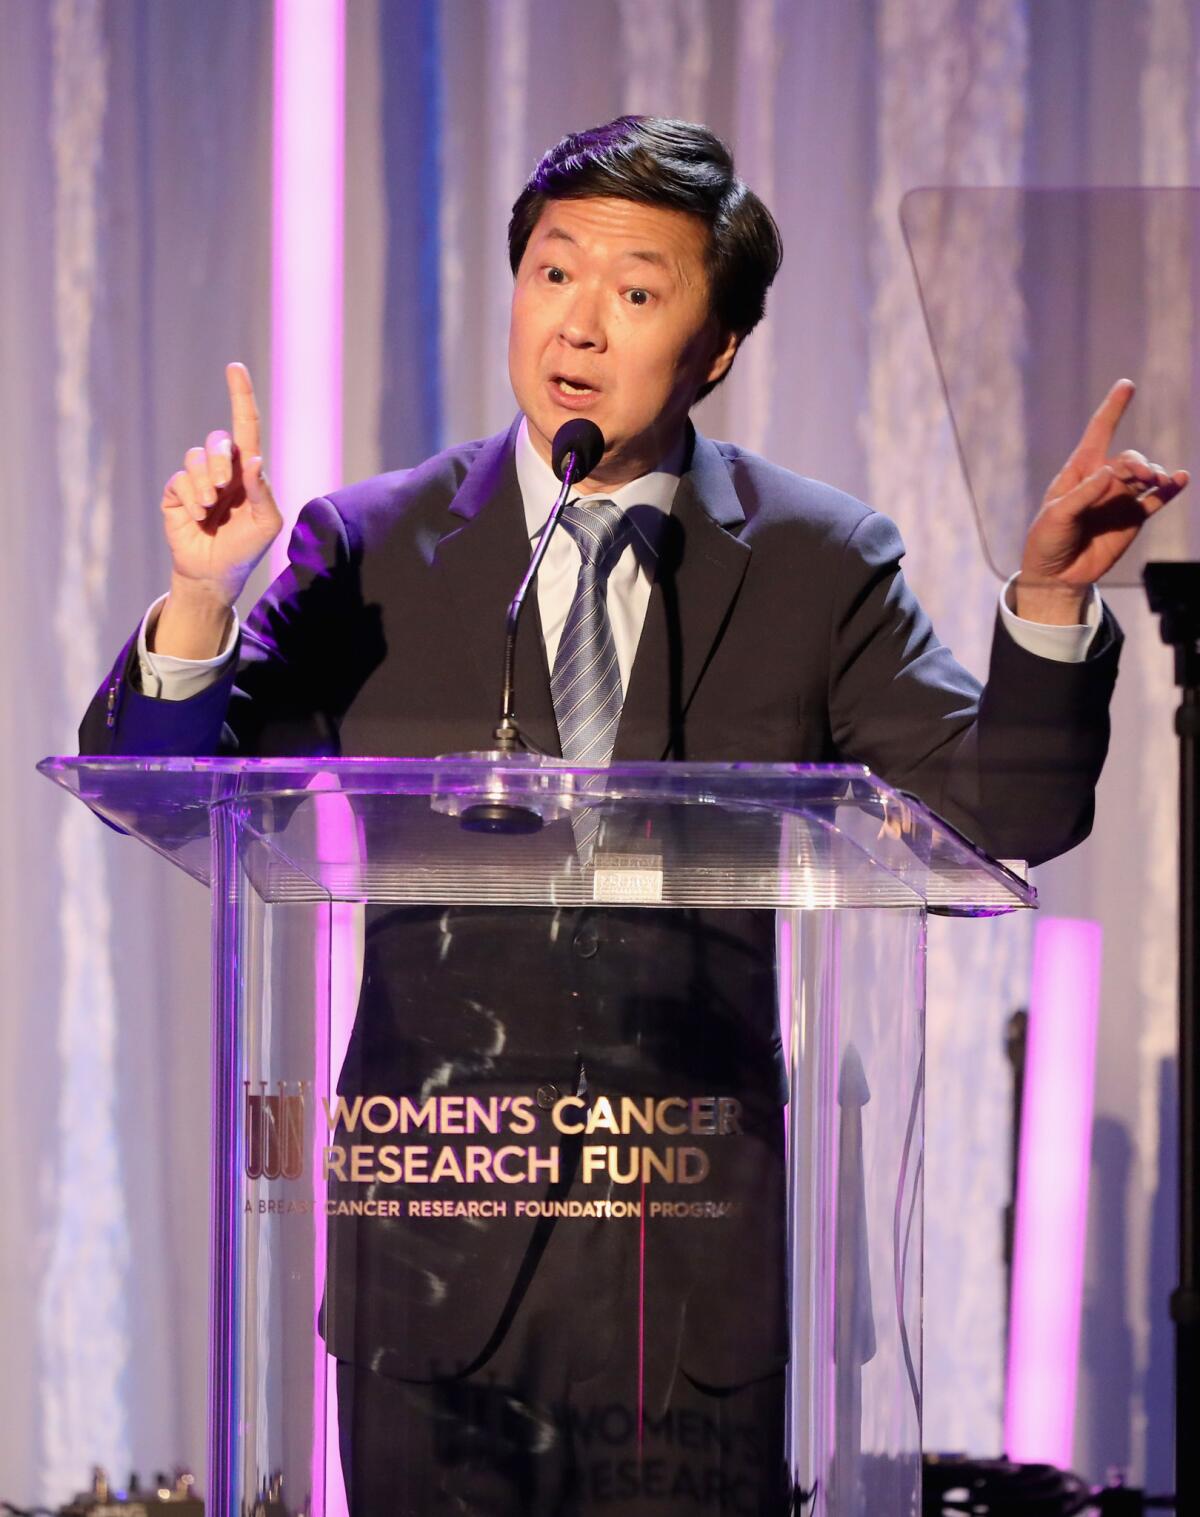 Actor Ken Jeong, who once had a medical career, speaks onstage during WCRF's An Unforgettable Evening event.